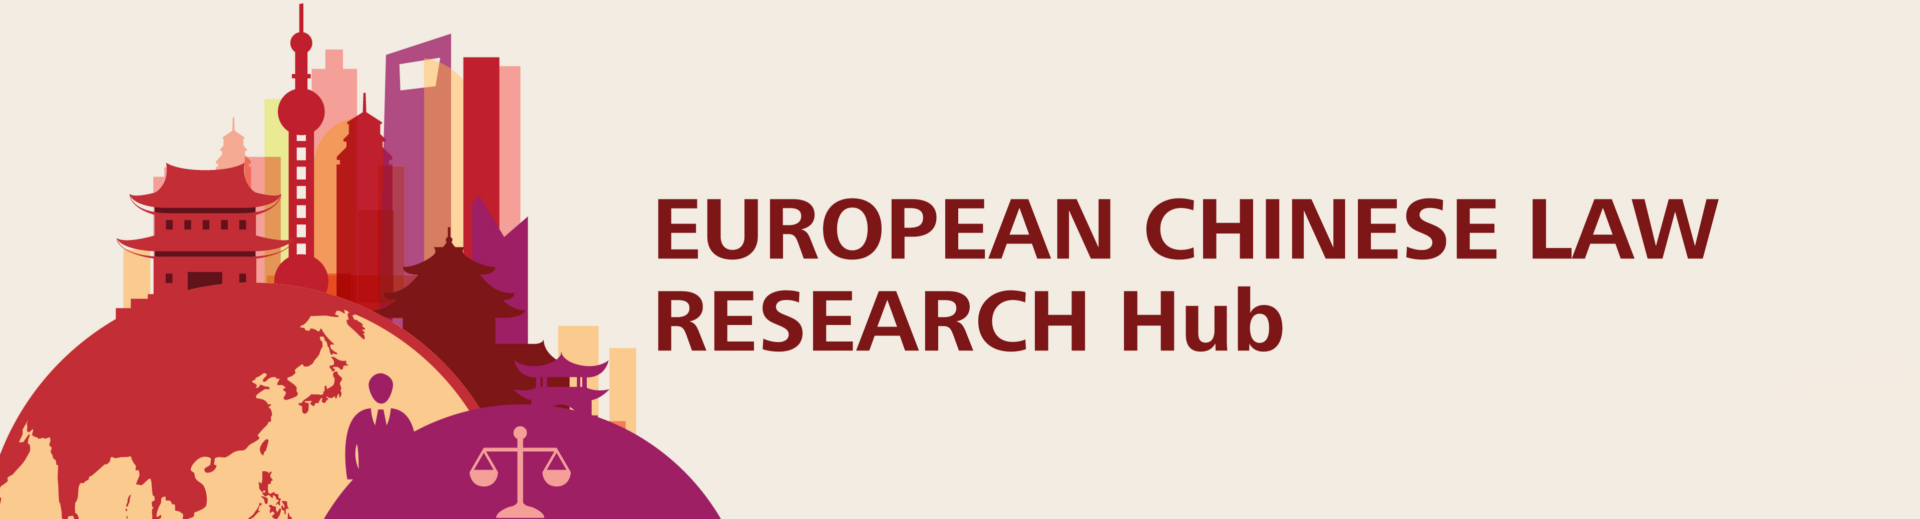 European Chinese Law Research Hub